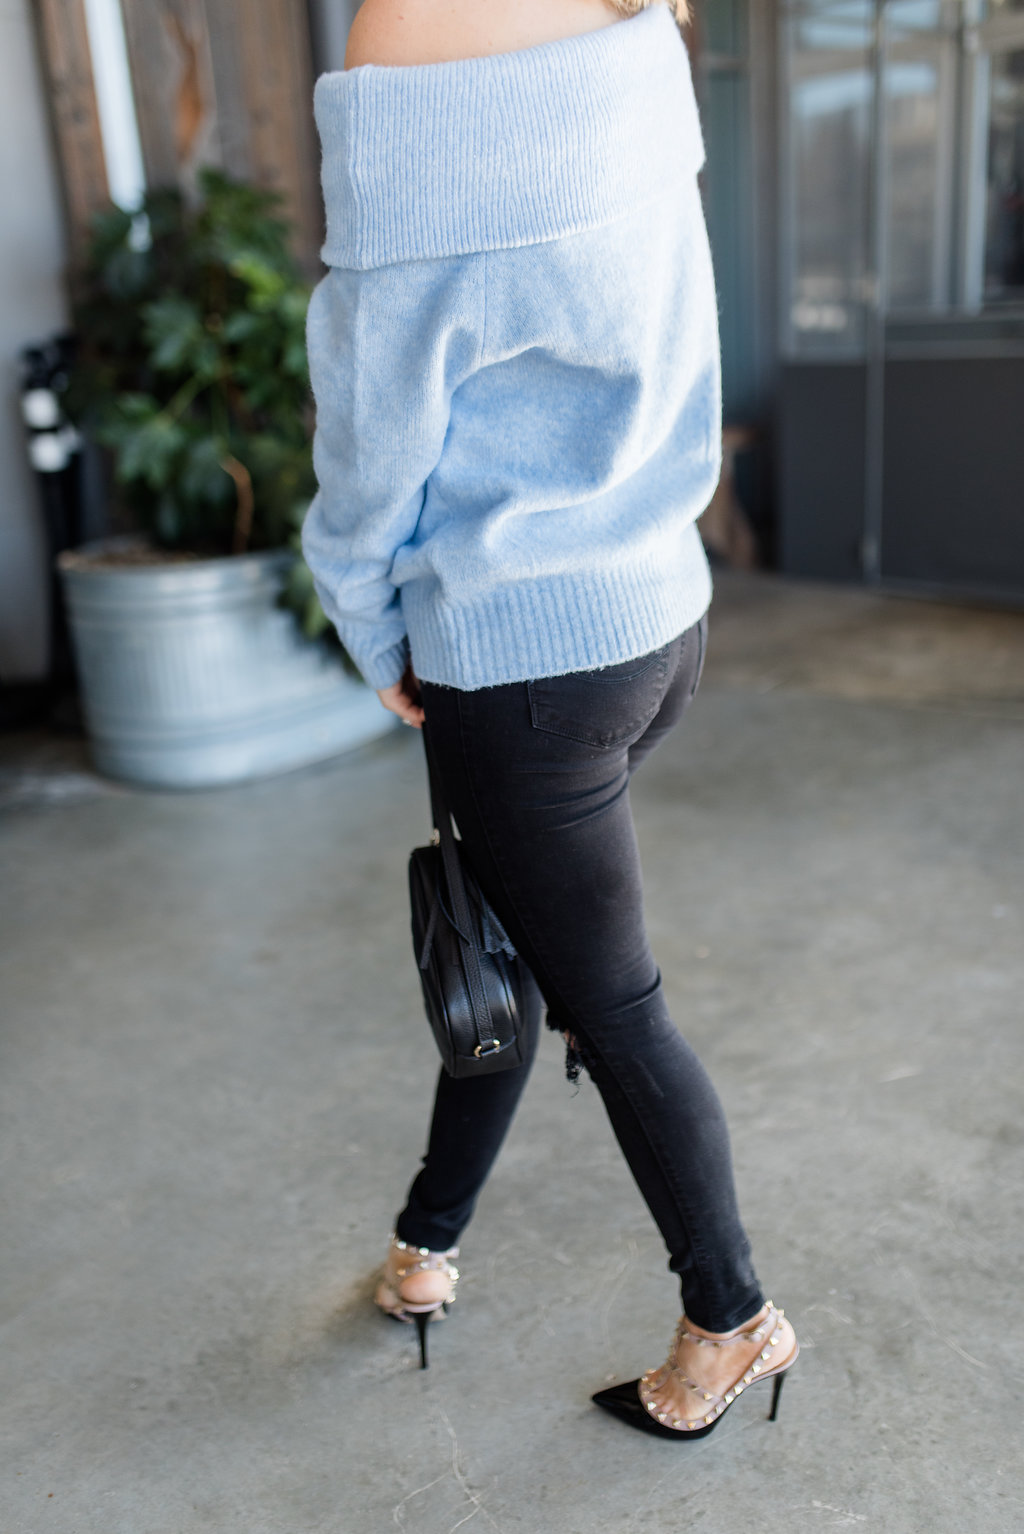 Chilly Spring Morning Brunch Sweater 